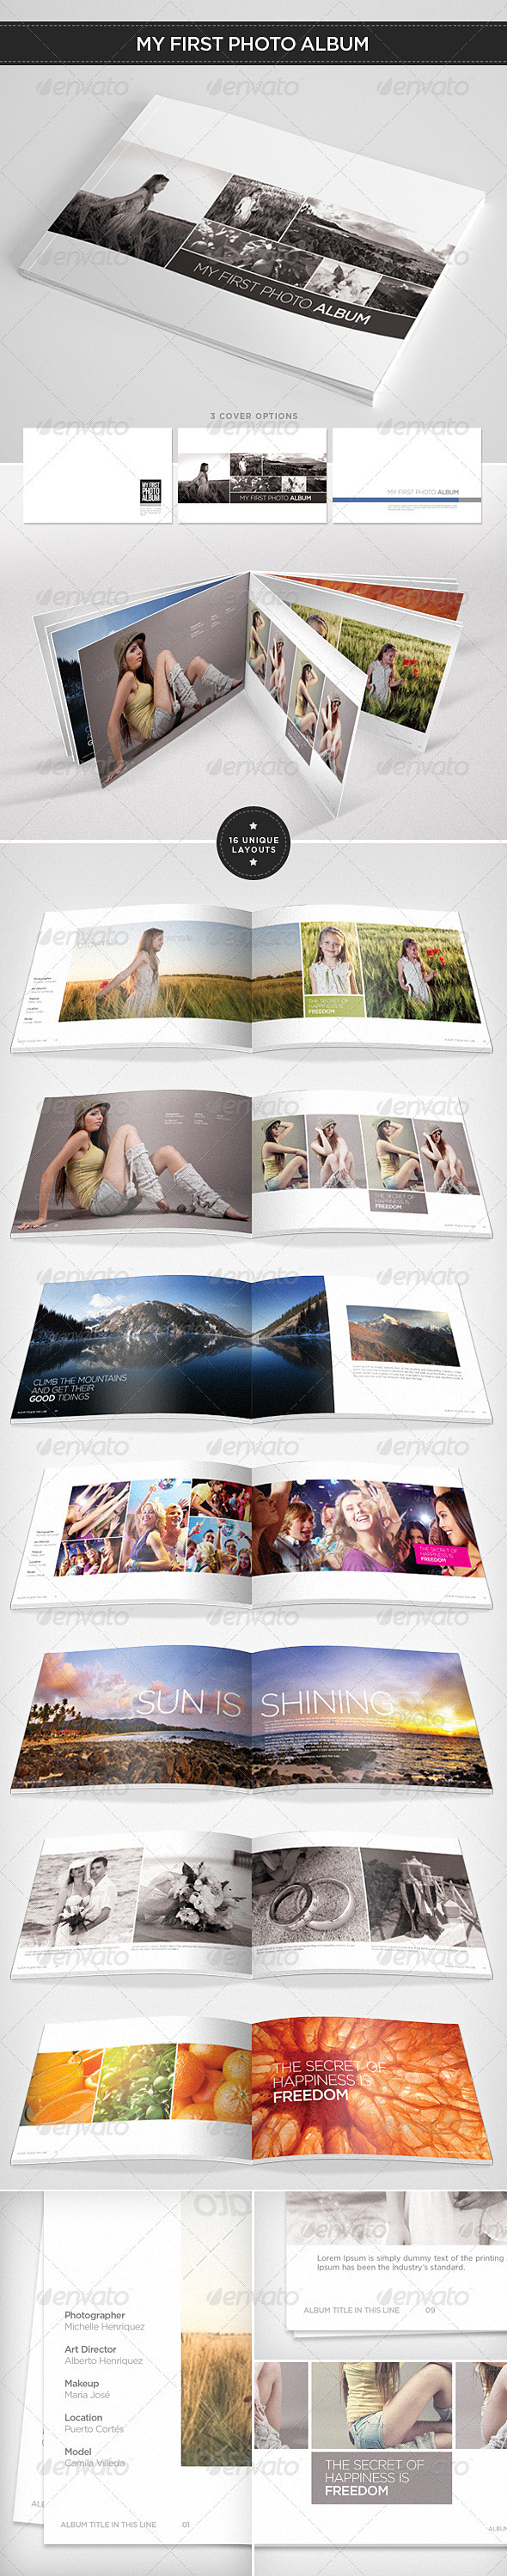 My First Photo Album By Eamejia Graphicriver 